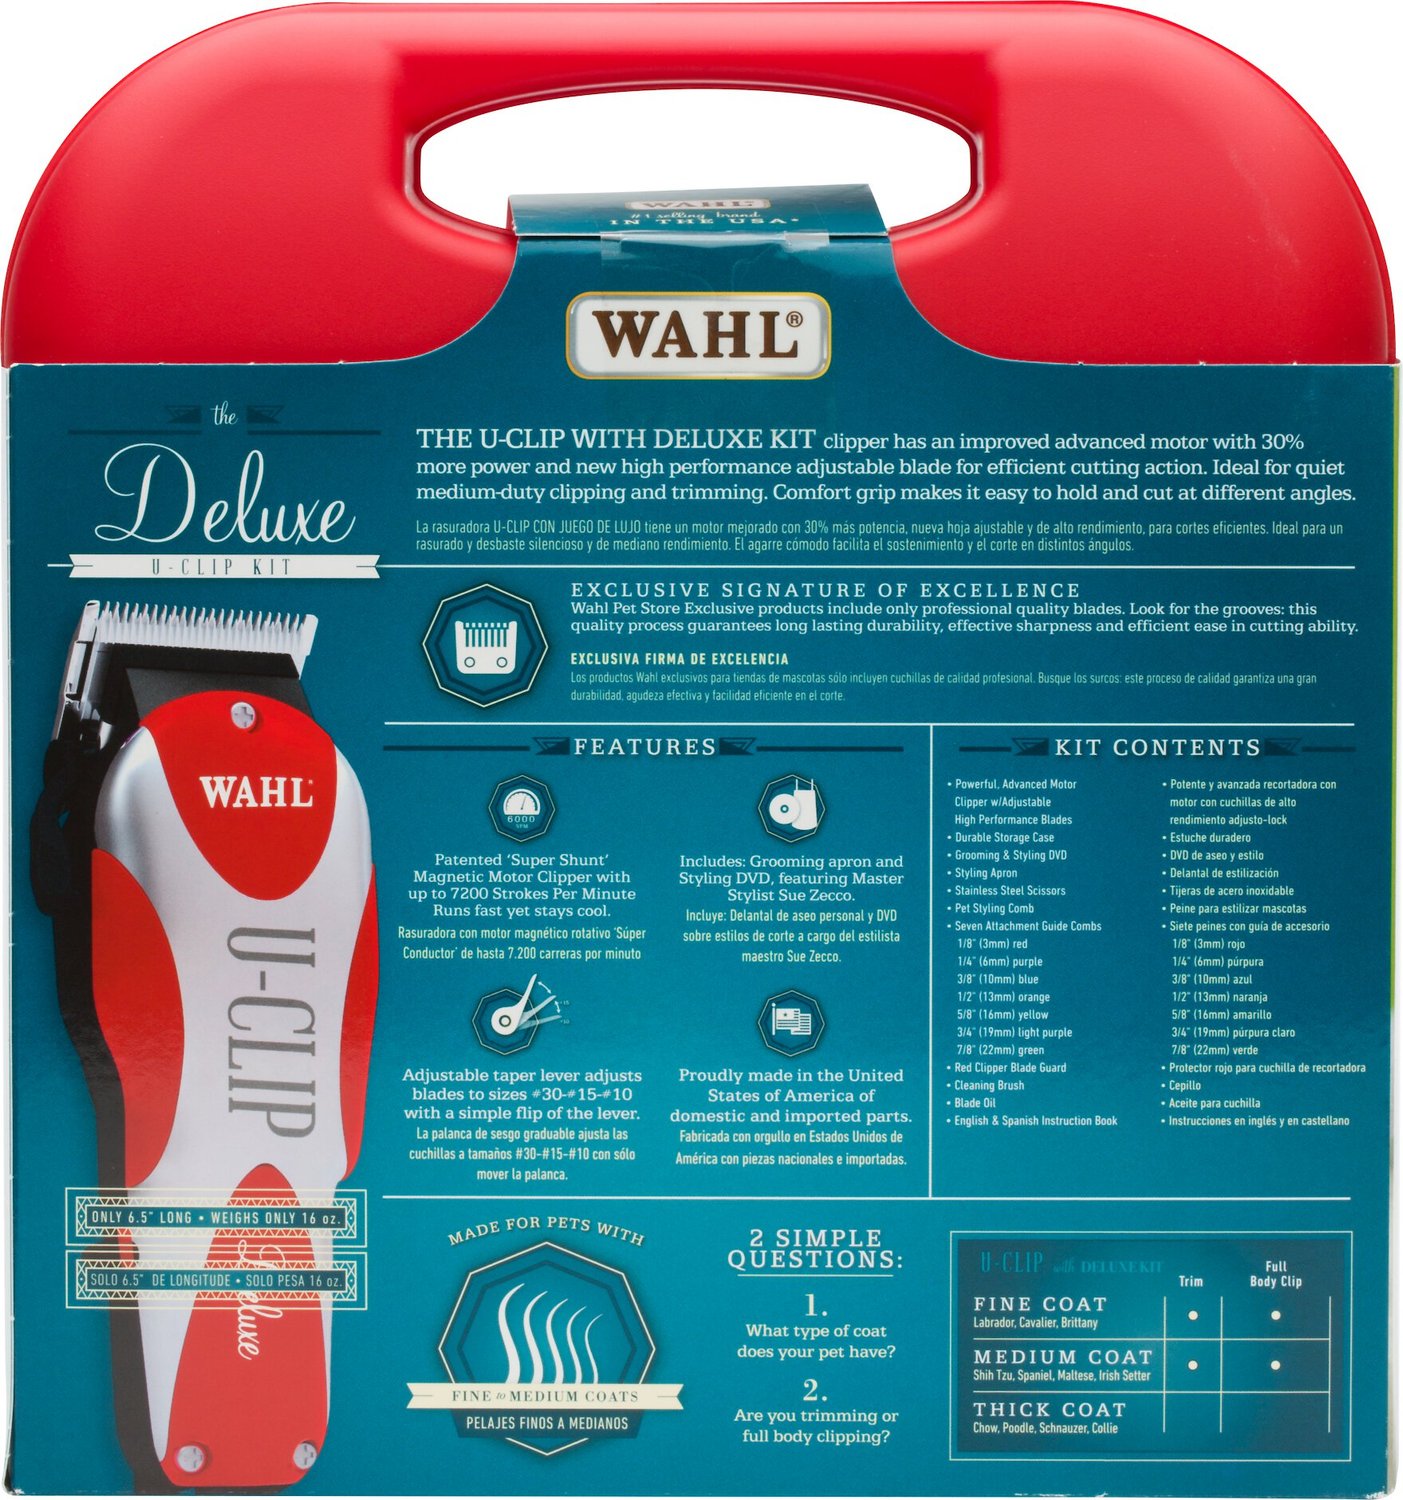 wahl dog clippers u clip